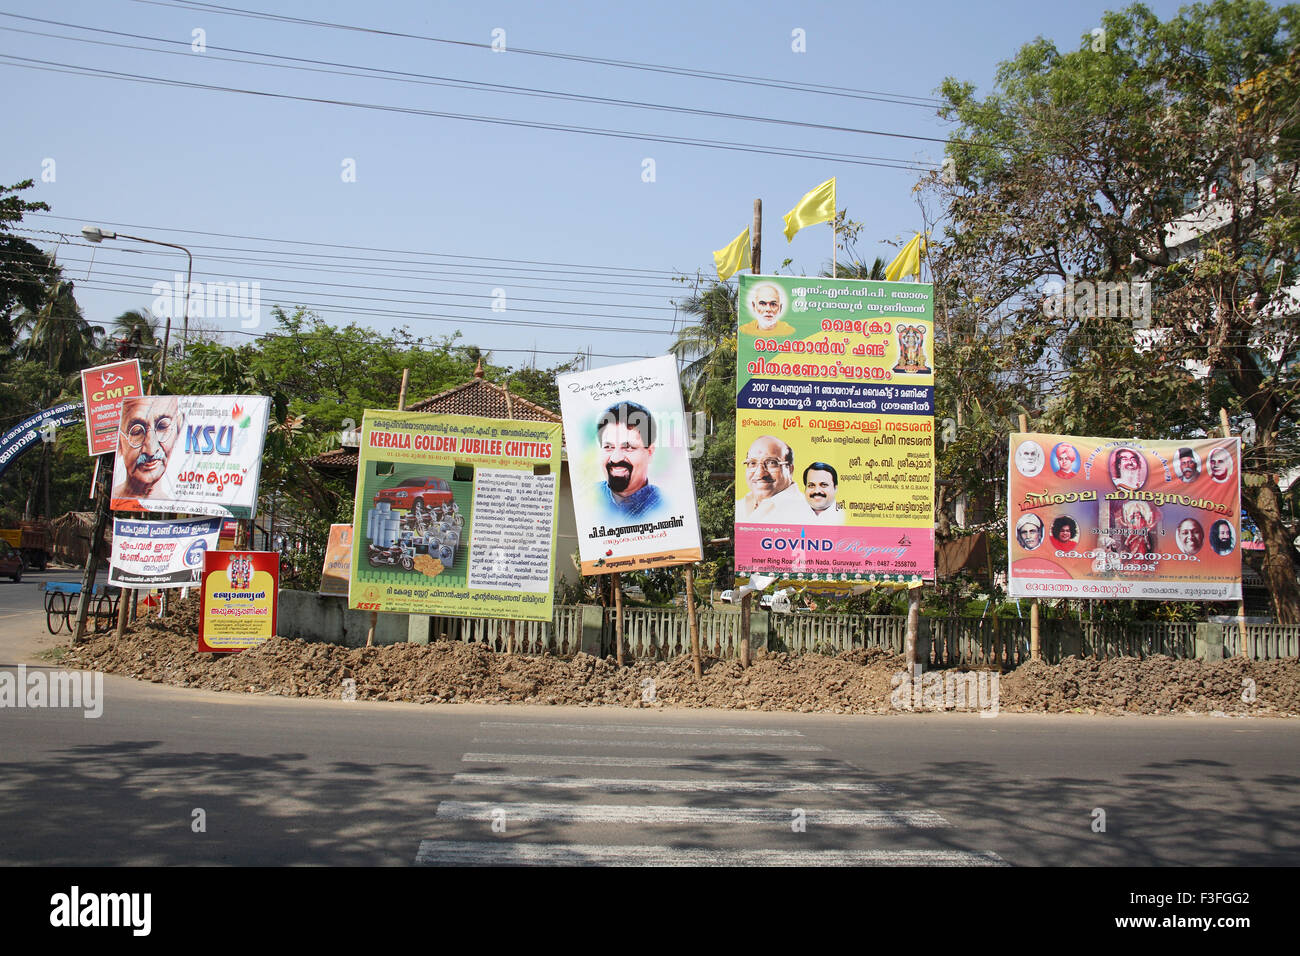 Advertising hoardings posters in Malayalam displayed to the side of road on the way to Guruvayur Trichur Thrissur Kerala India Asia Stock Photo